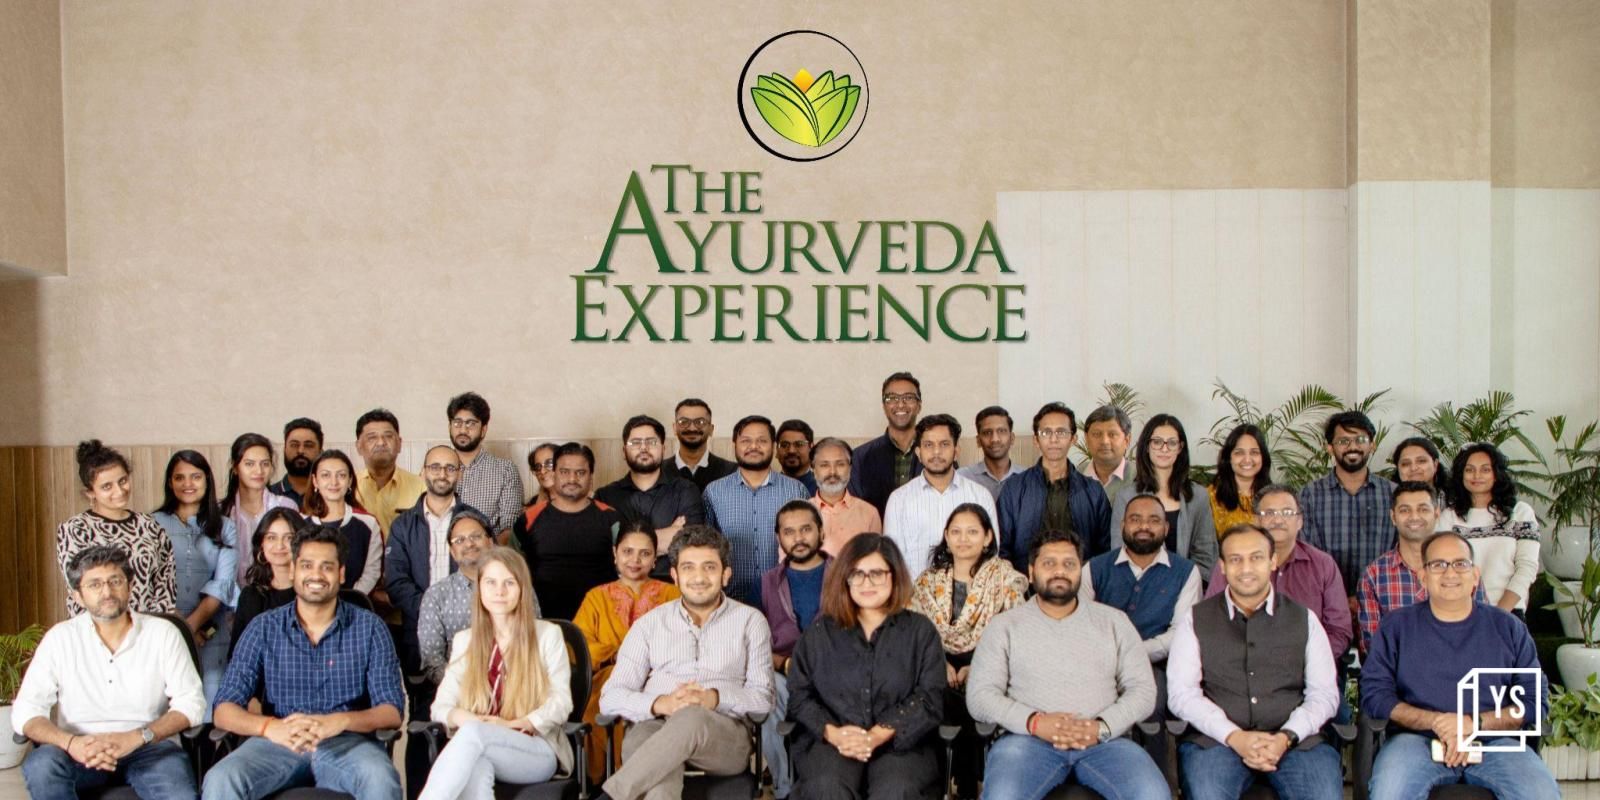 The Ayurveda Experience bags $27M Series C funding from Jungle Ventures, SIDBI Ventures